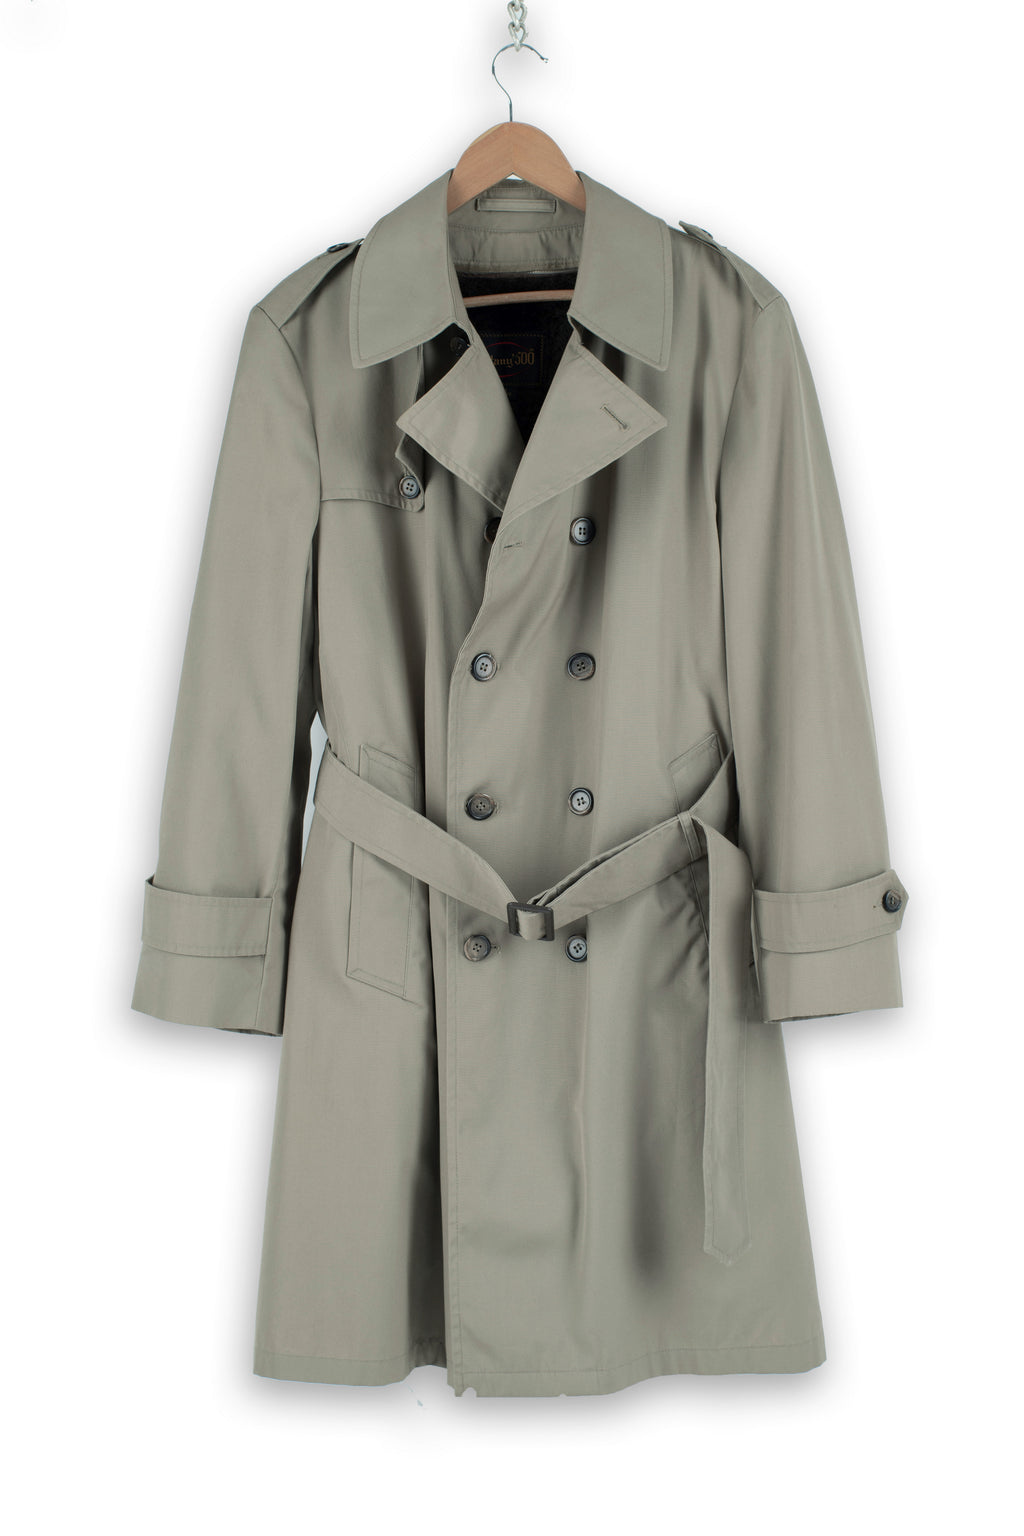 Botany 500 Khaki Brown Trench Coat with Zip-Out Liner, USA 40S